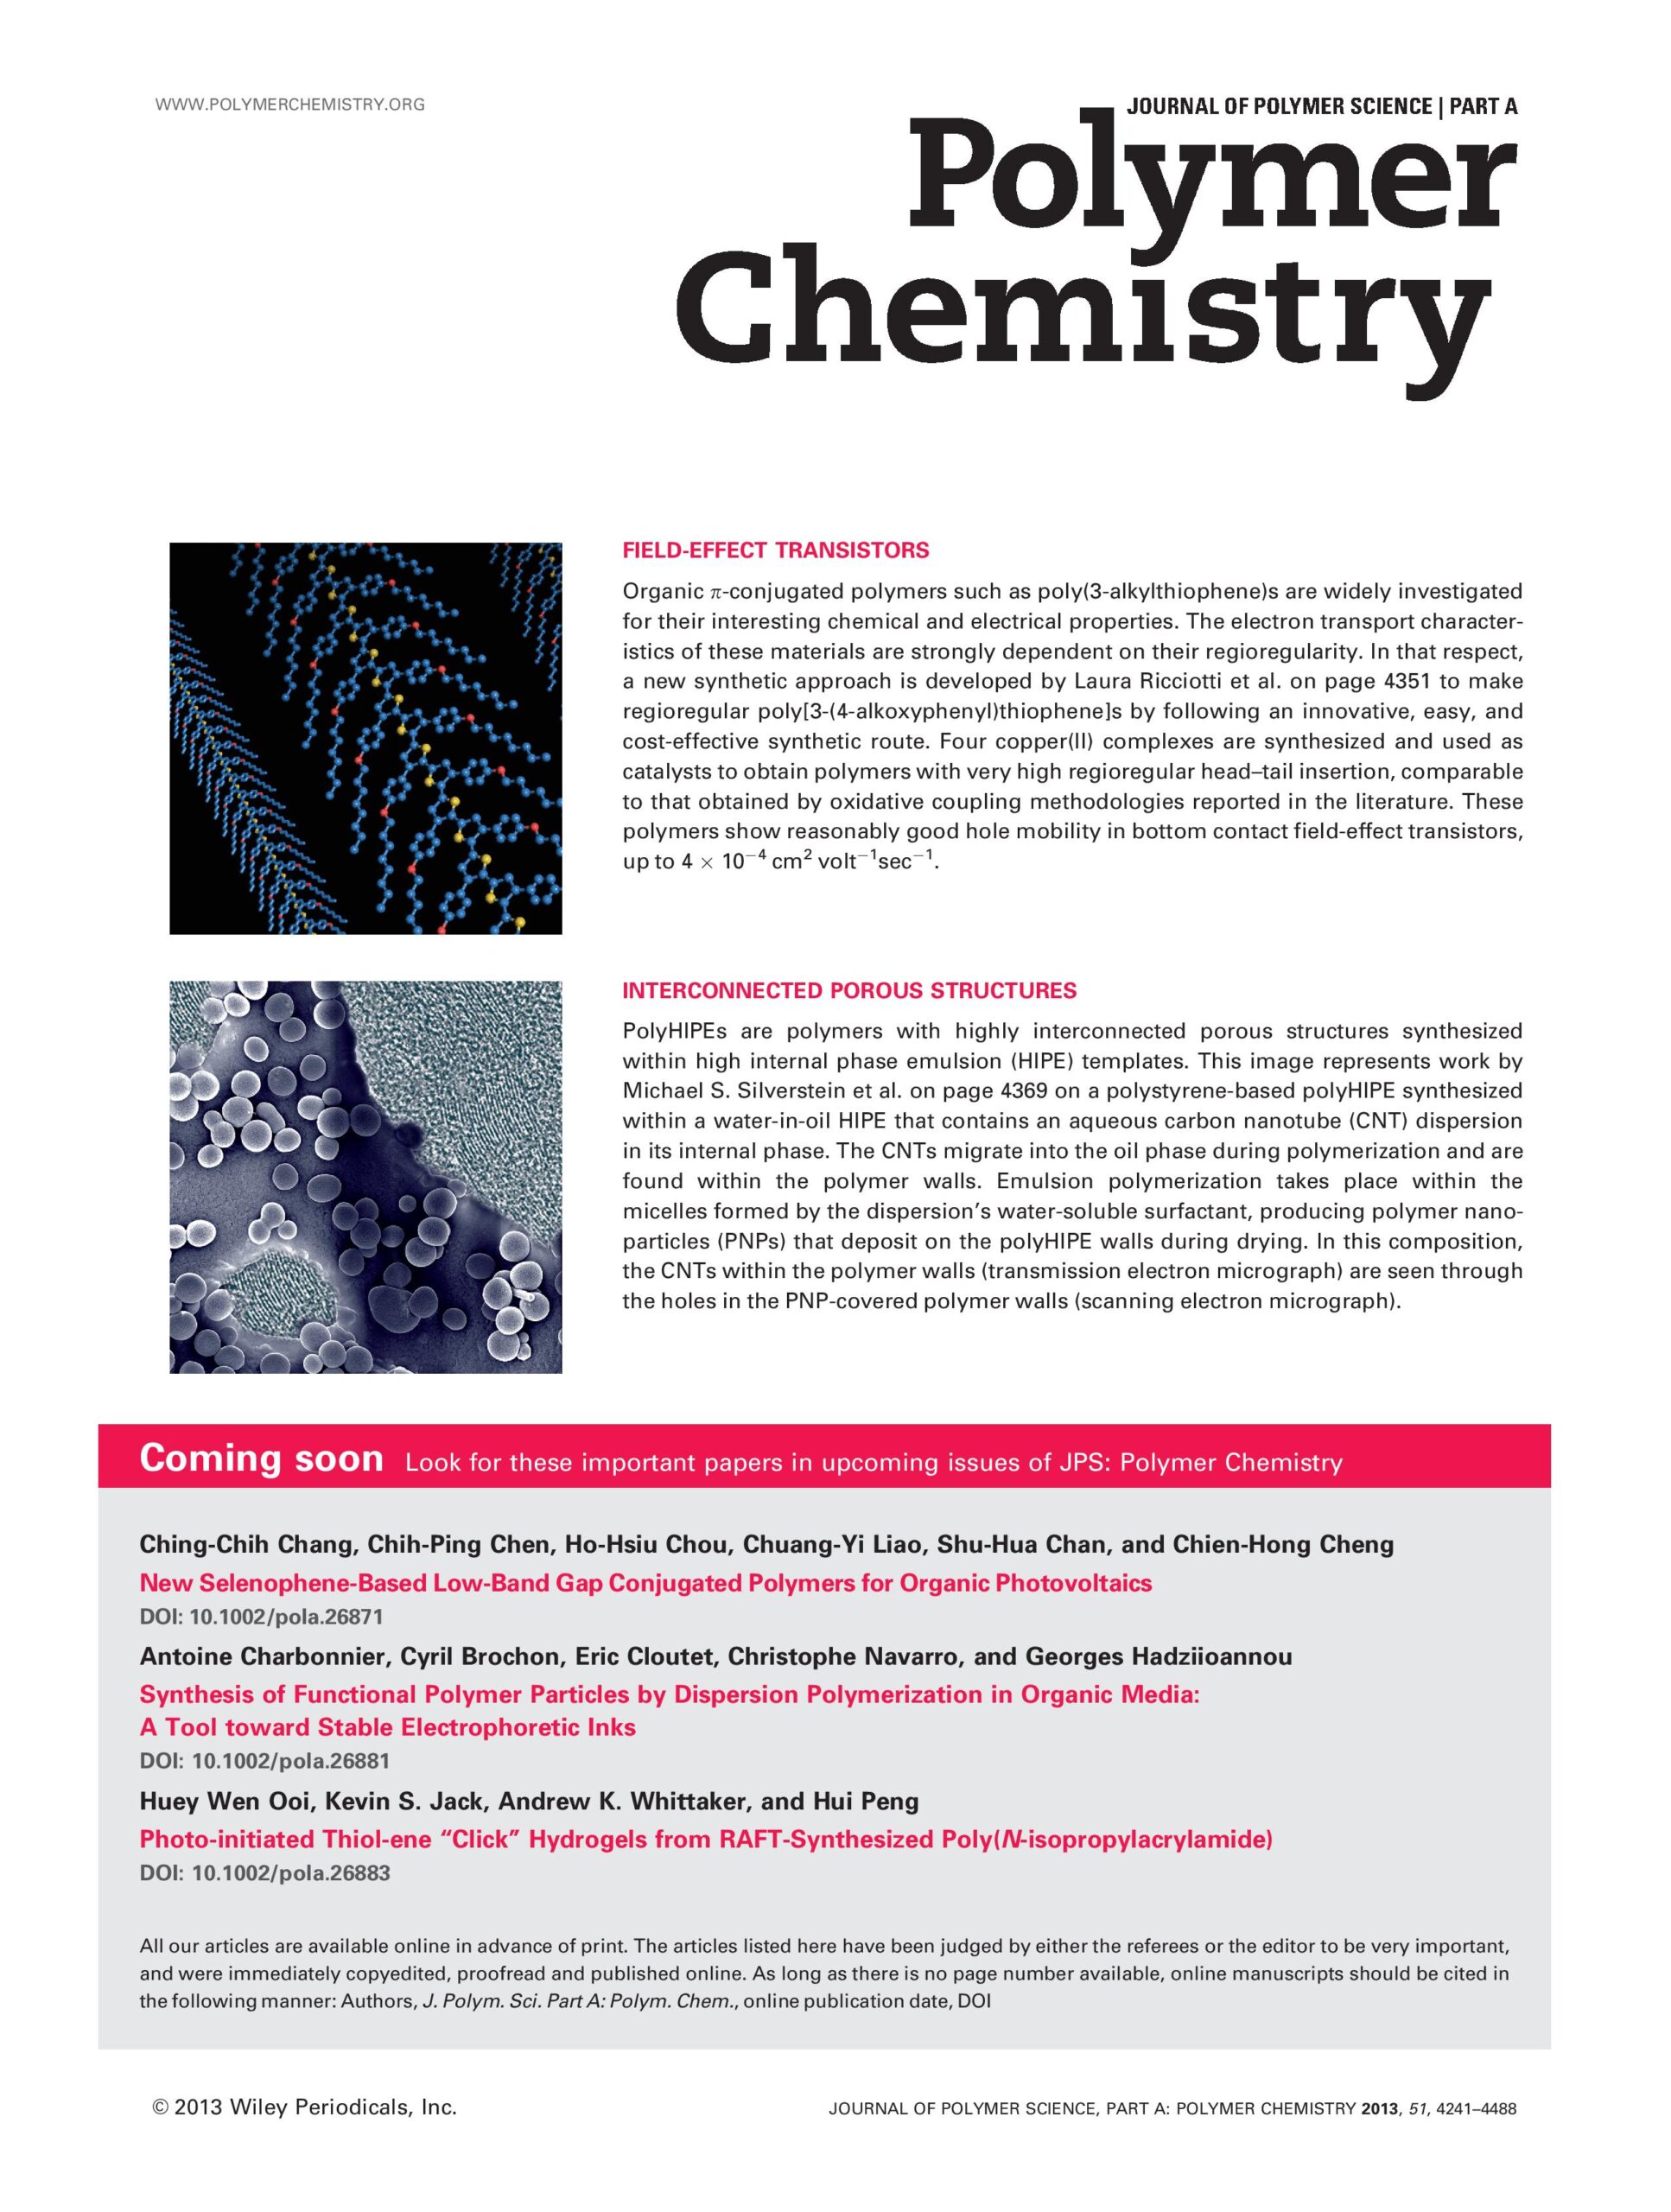 Journal of Polymer Science - Part A - Polymer Chemistry Picture2